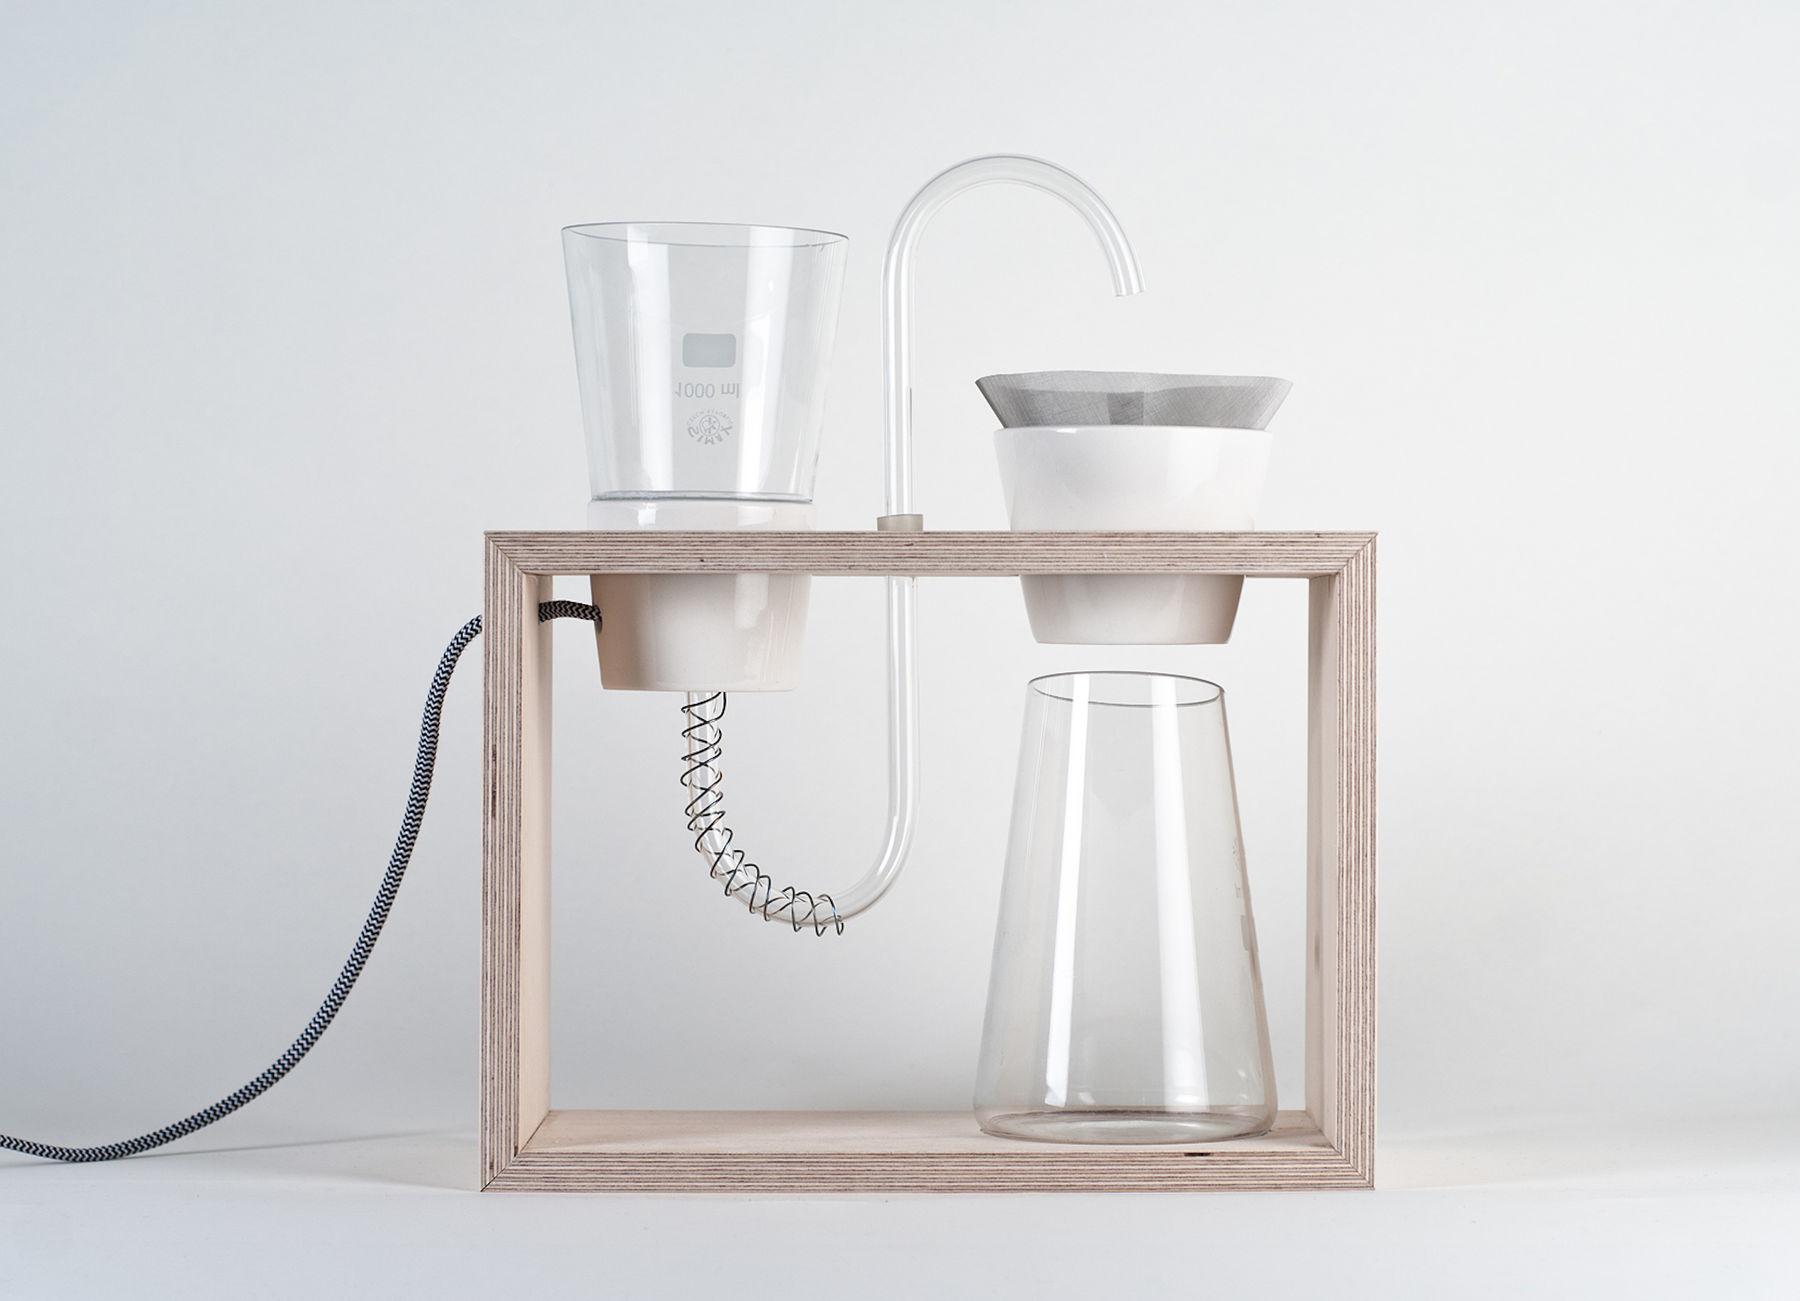 Simo_Puintila_Aija Hannula_Coffee Cooker_Product and Form 2015_CoDe_LowRes